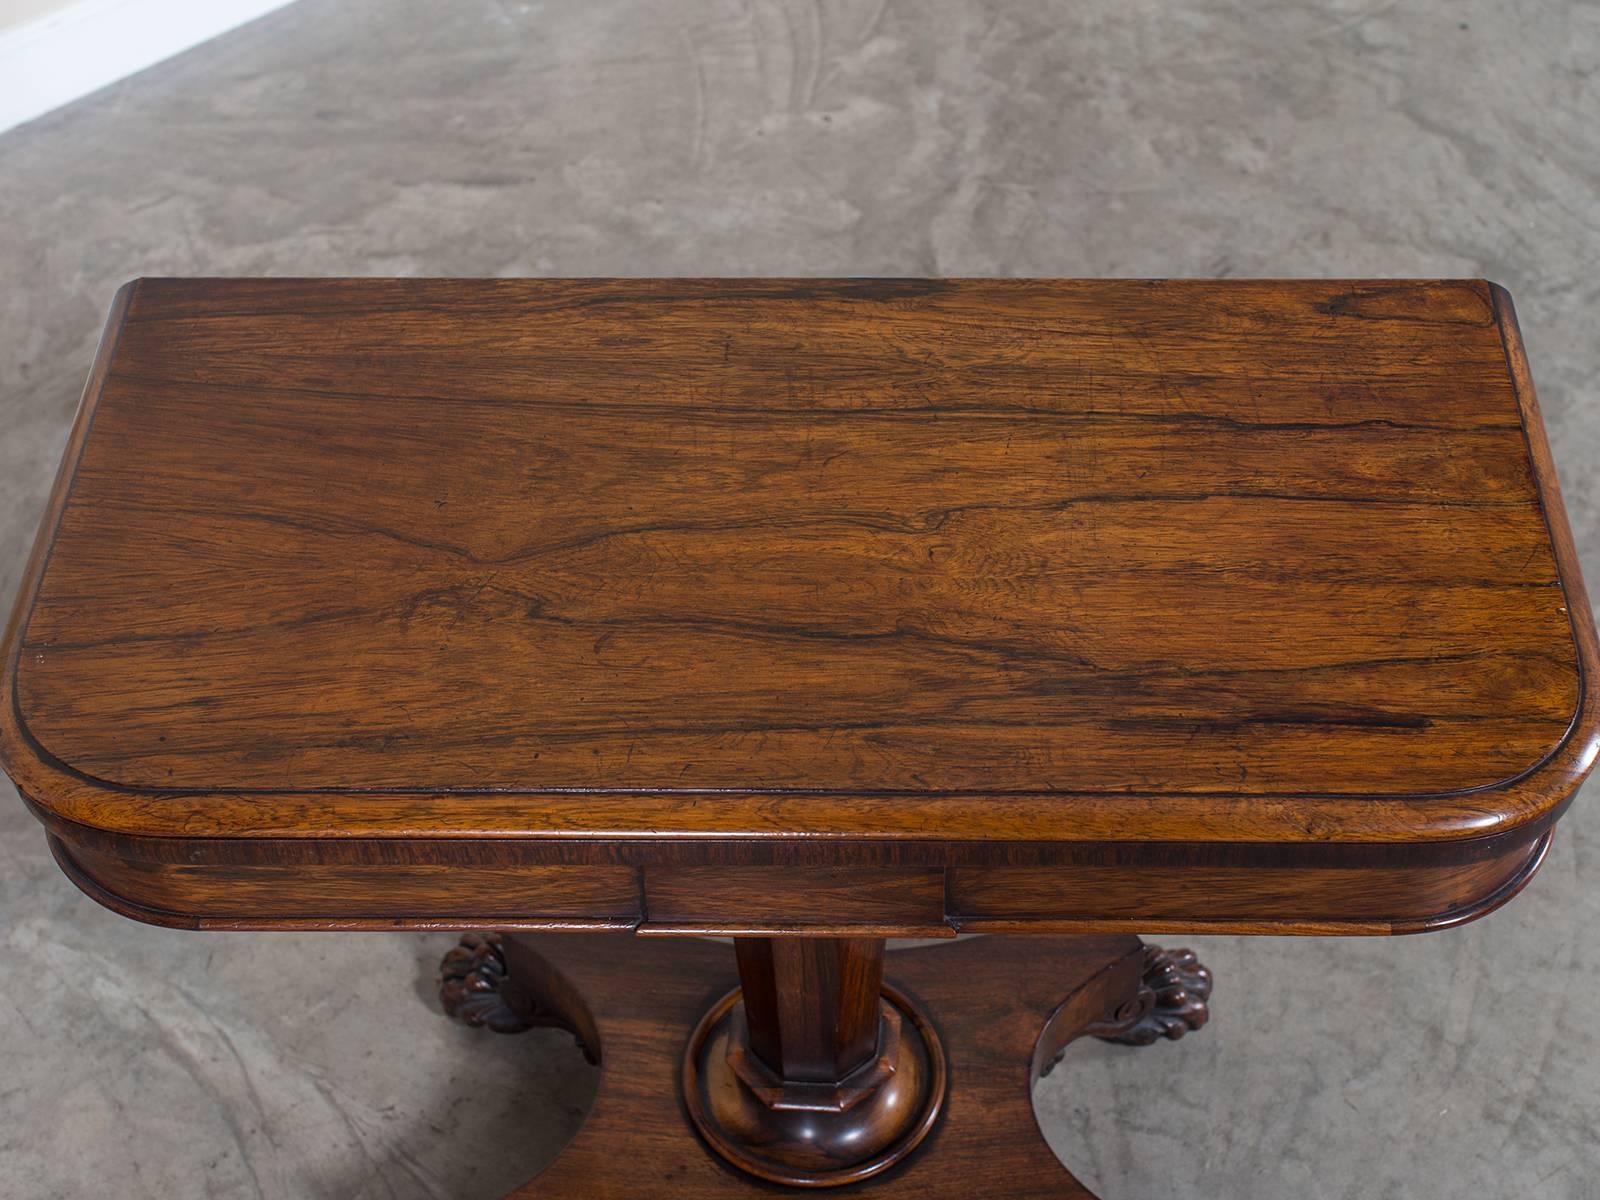 Receive our new selections direct from 1stdibs by email each week. Please click Follow Dealer below and see them first!

The clean and bold profile of this antique English rosewood game card table is striking. Constructed during the William IV